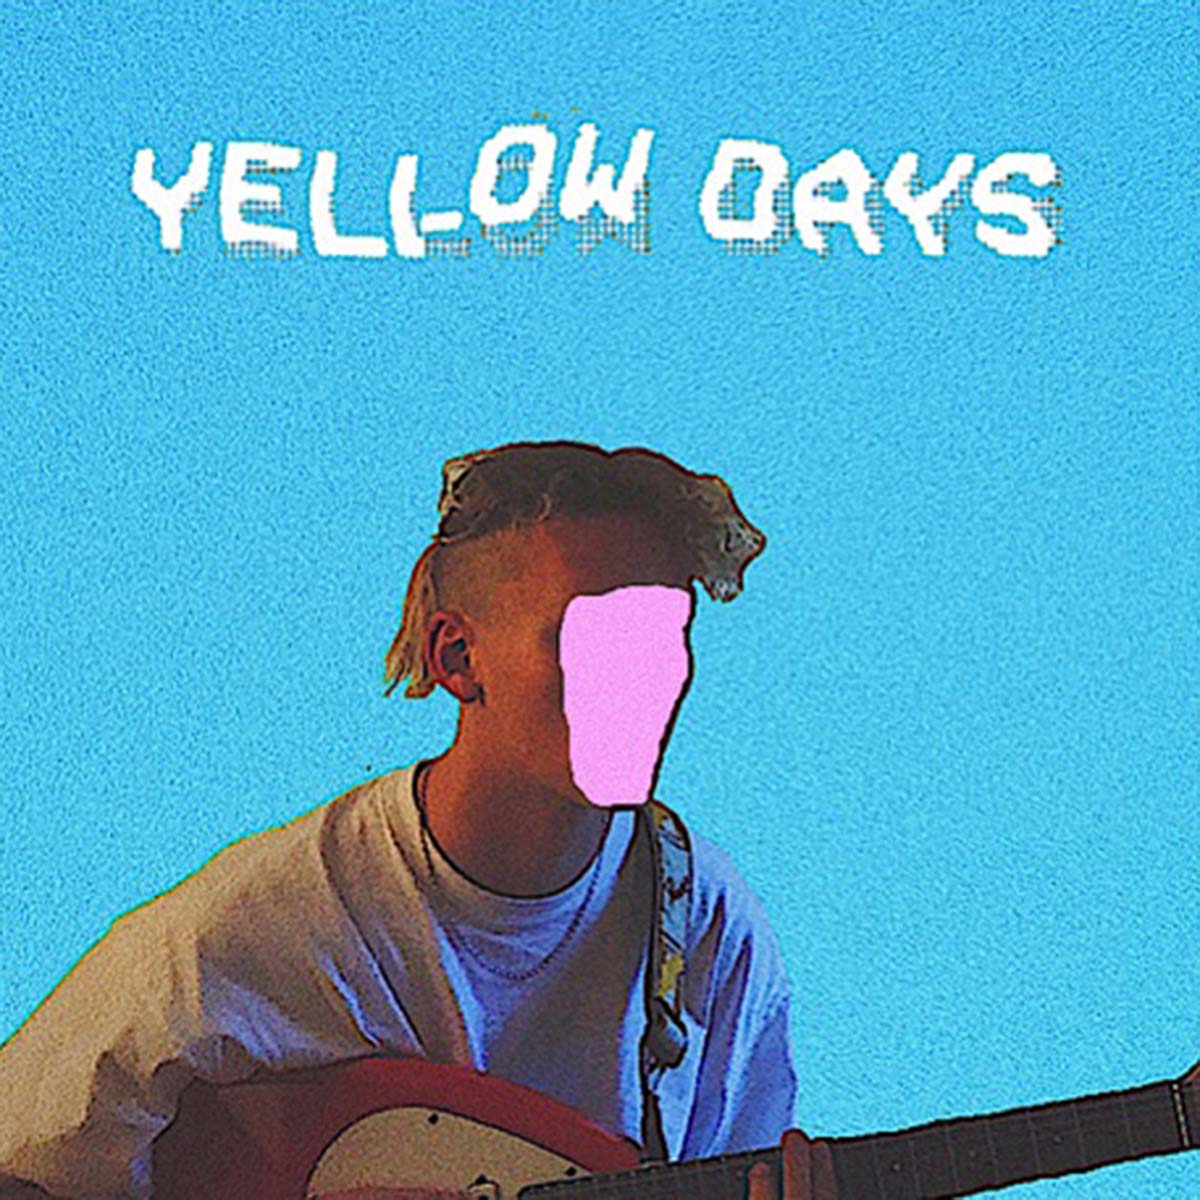 yellow days is everything okay with your world